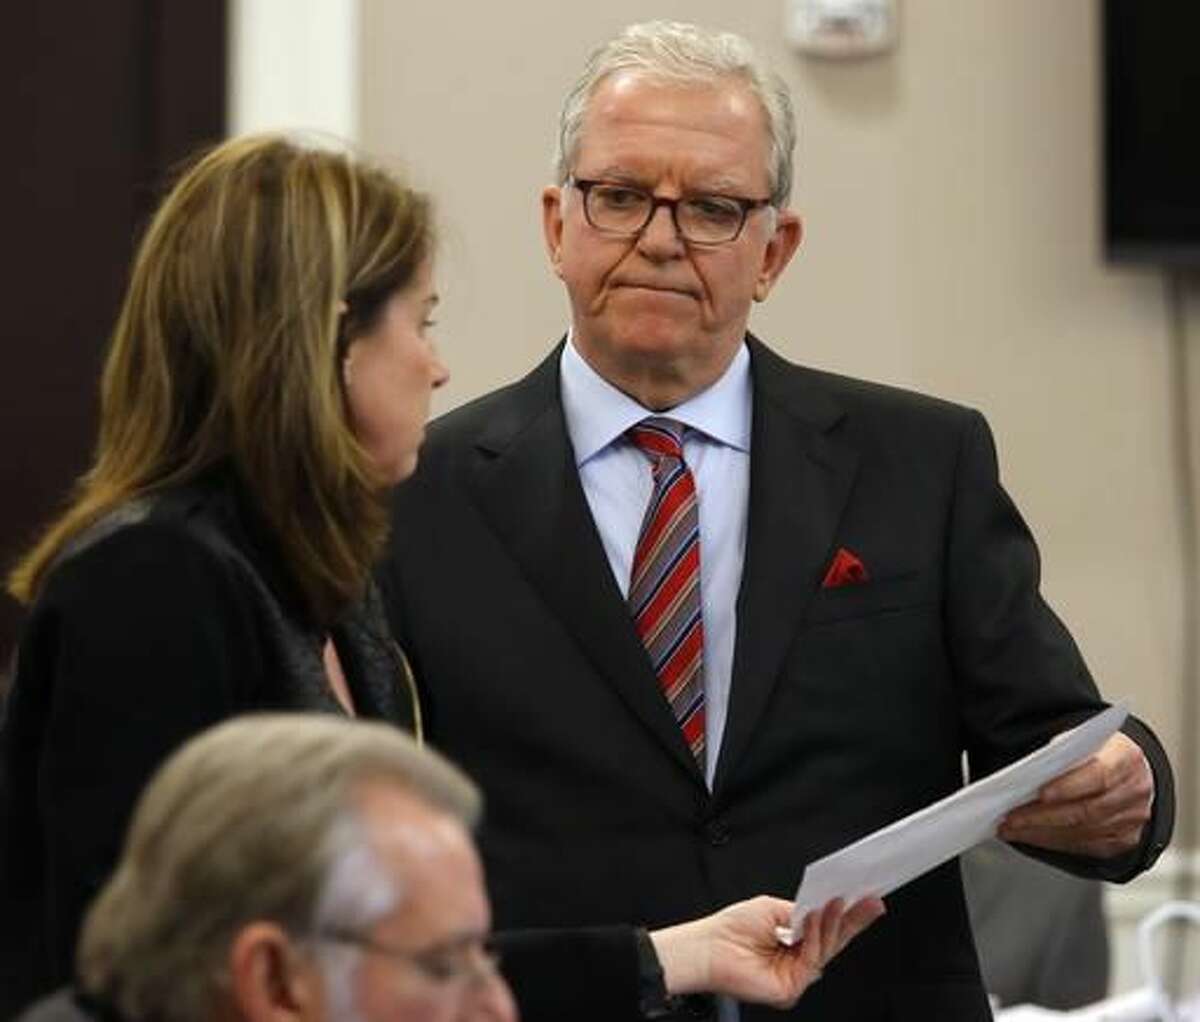 Defense attorney Andy Savage, right, speaks with Ninth Circuit Solicitor Scarlett Wilson in court during the murder trial of former North Charleston police officer Michael Slager at the Charleston County court in Charleston, S.C., Monday, Nov. 28, 2016. A judge is considering whether jurors will visit the spot where a white former South Carolina police officer is accused of shooting and killing an unarmed black man in North Charleston. (Grace Beahm/Post and Courier via AP, Pool)